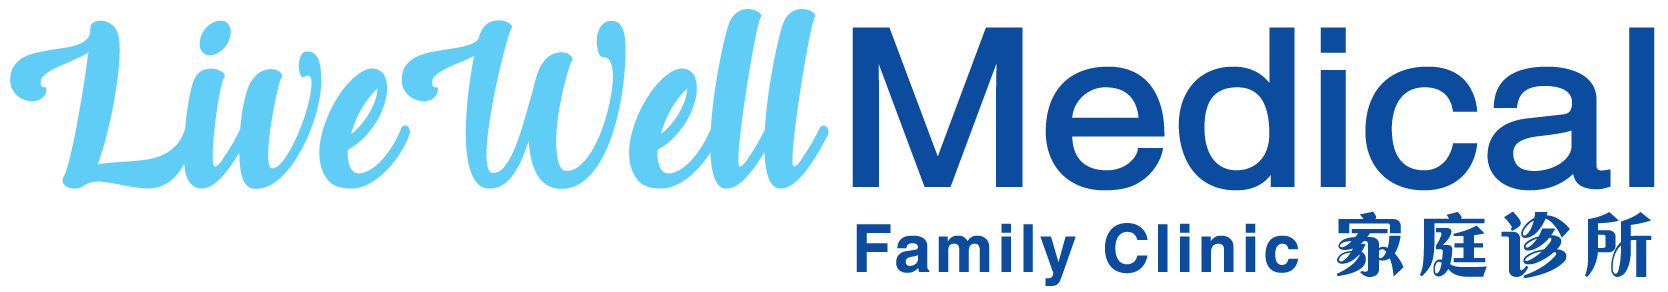 LiveWell Medical Family Clinic